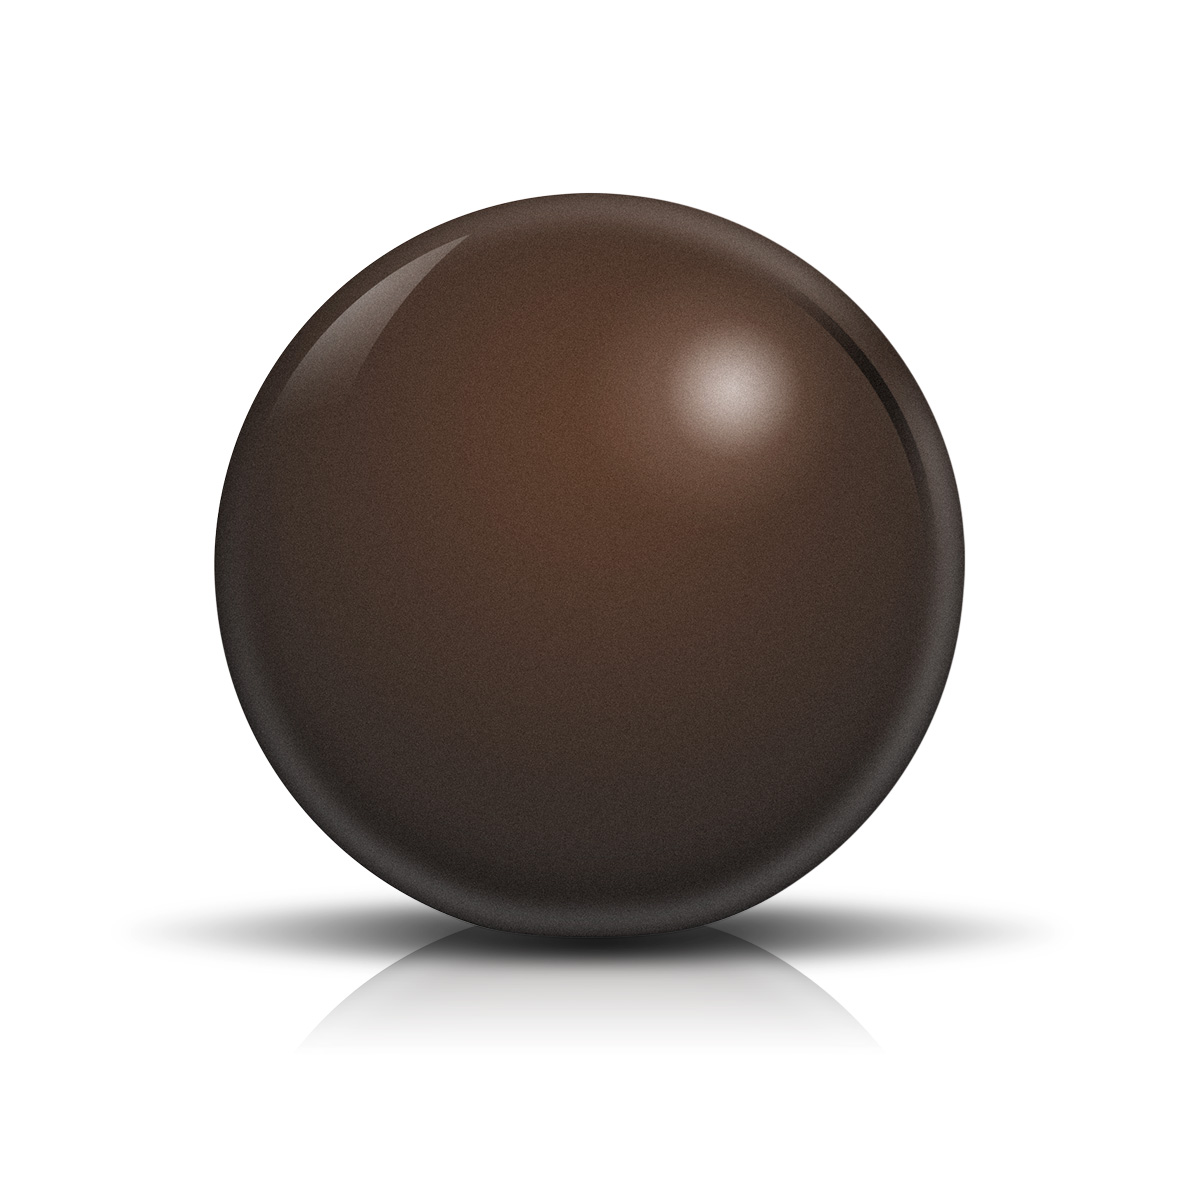 Decorative Sphere, small, high gloss finish, brown, LxWxD ca. 10,5 x 10,5 x 9,5 cm